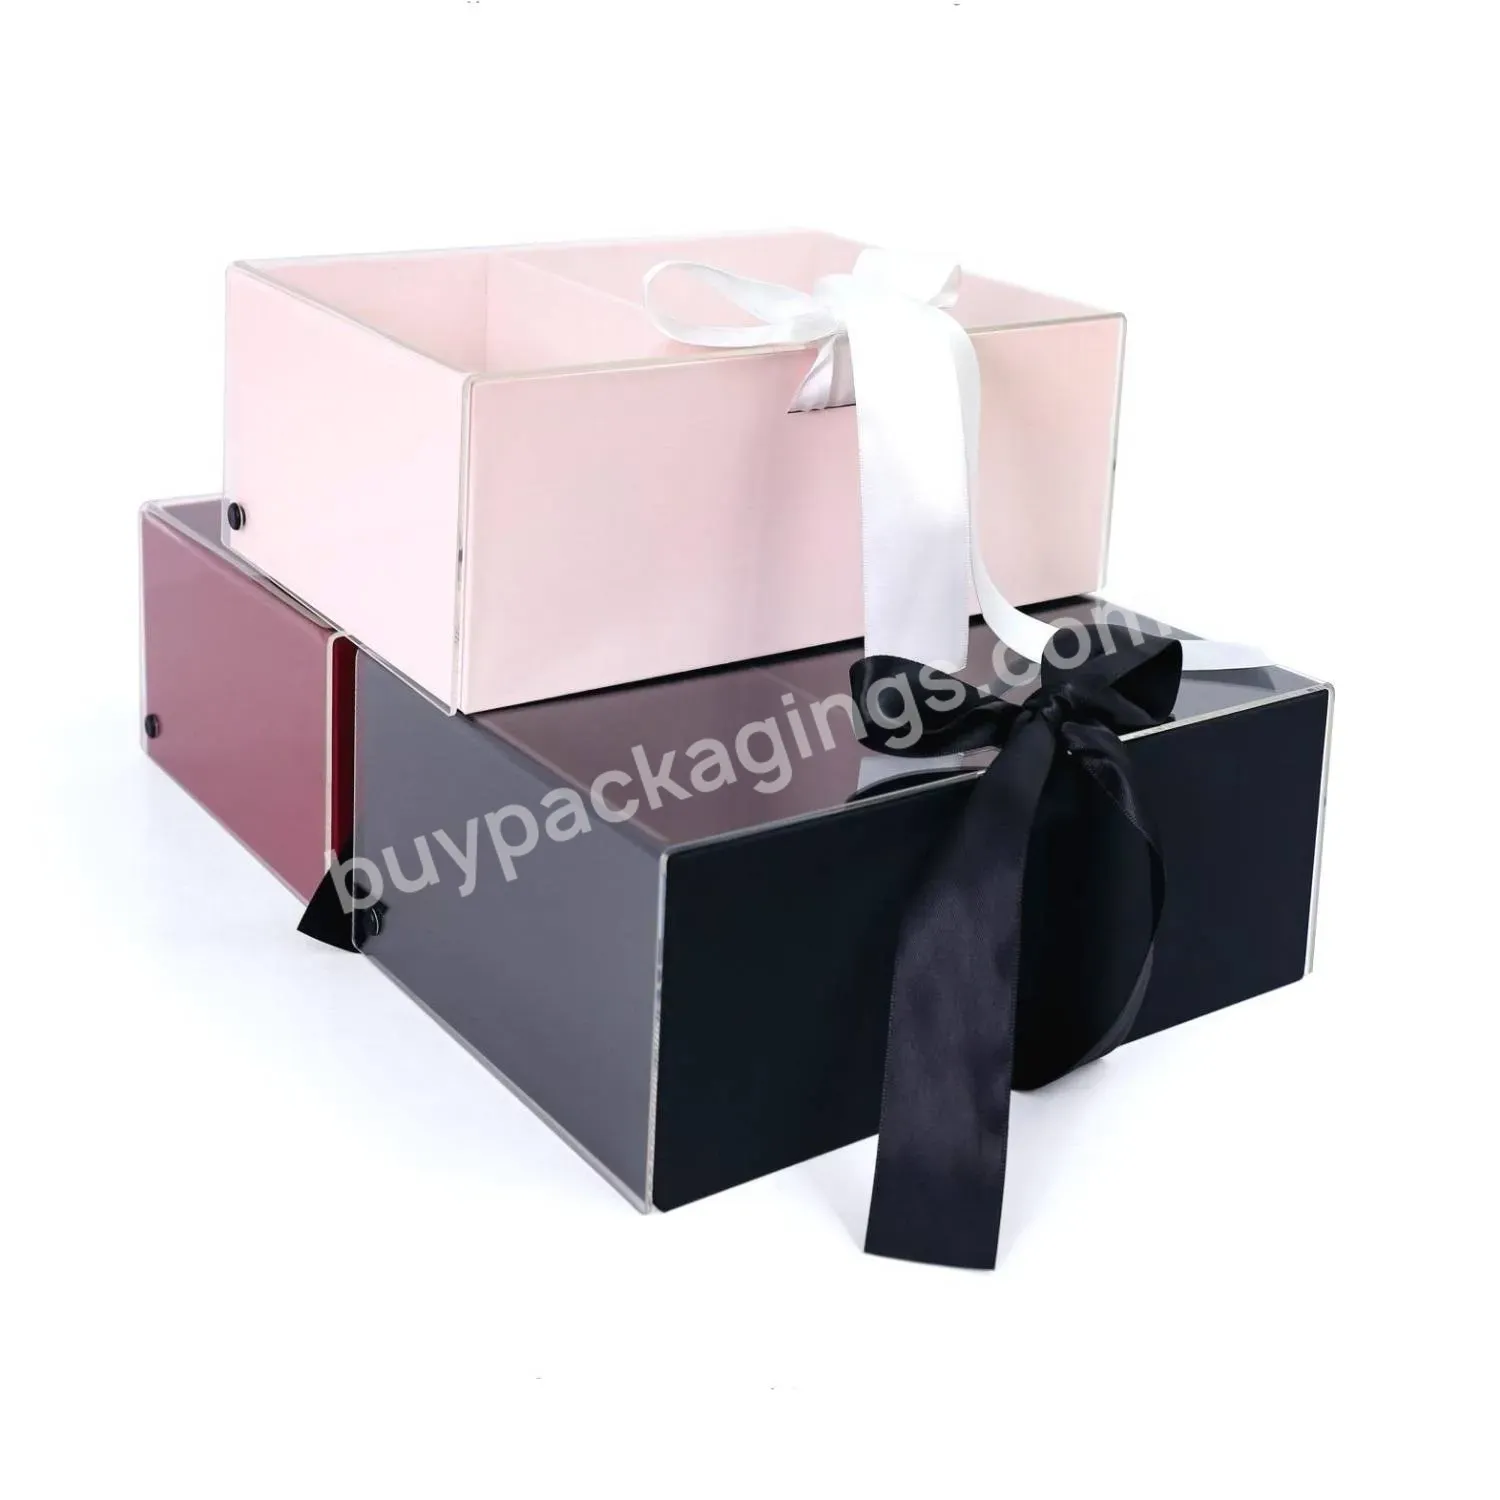 Elegant Acrylic Flower Gift Box Rectangular Paperboard Slotted Boxes With Acrylic Lid Cover - Buy Acrylic Flower Gift Box,Rectangular Paperboard Slotted Boxes,Paperboard Slotted Boxes With Acrylic Lid Cover.